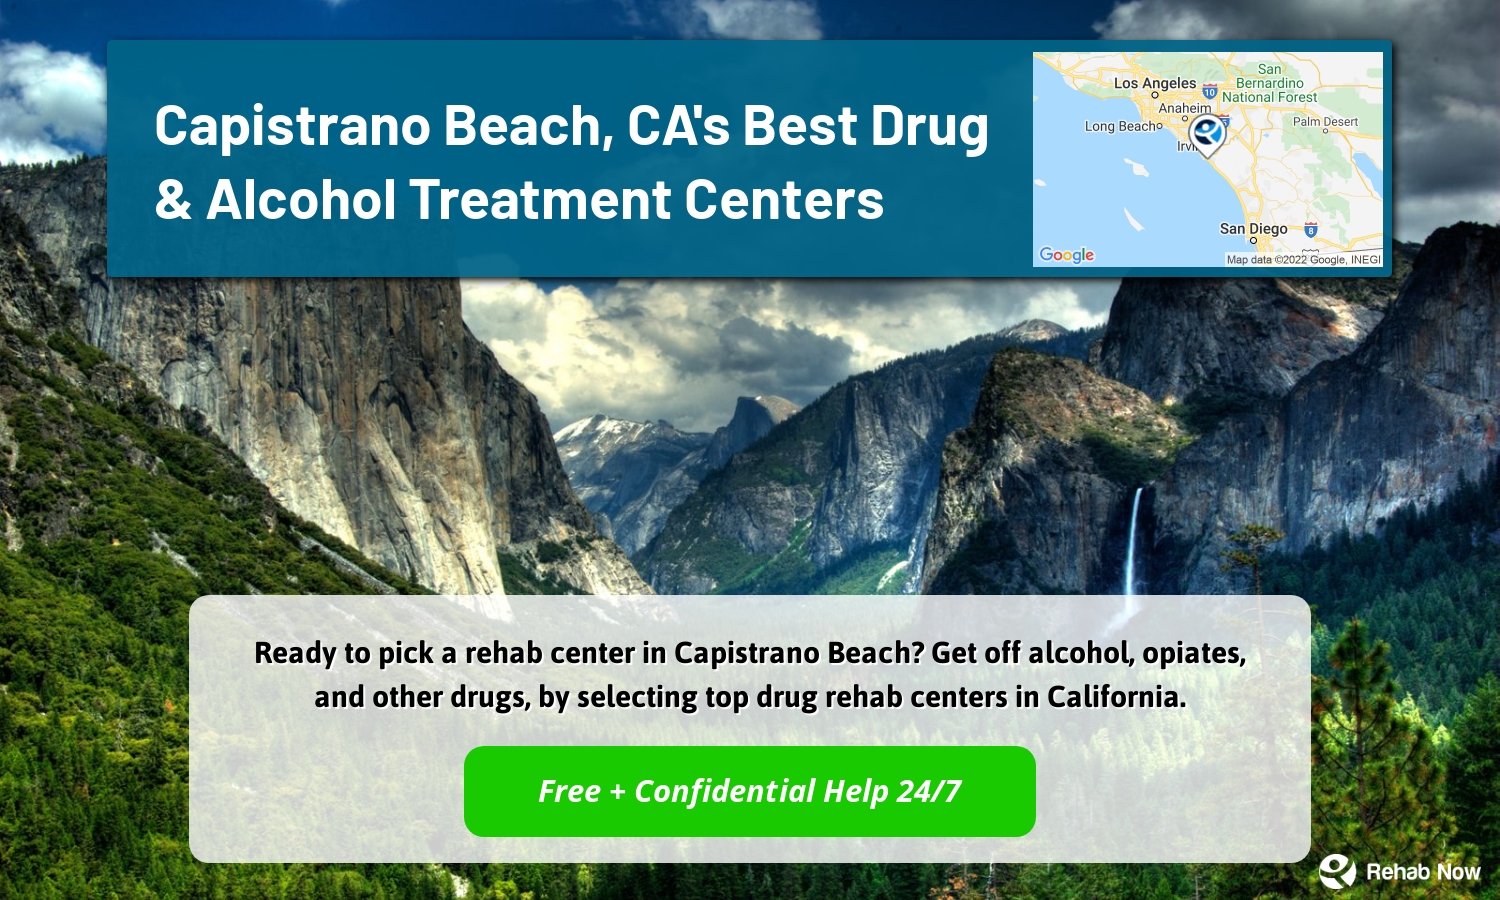 Ready to pick a rehab center in Capistrano Beach? Get off alcohol, opiates, and other drugs, by selecting top drug rehab centers in California.